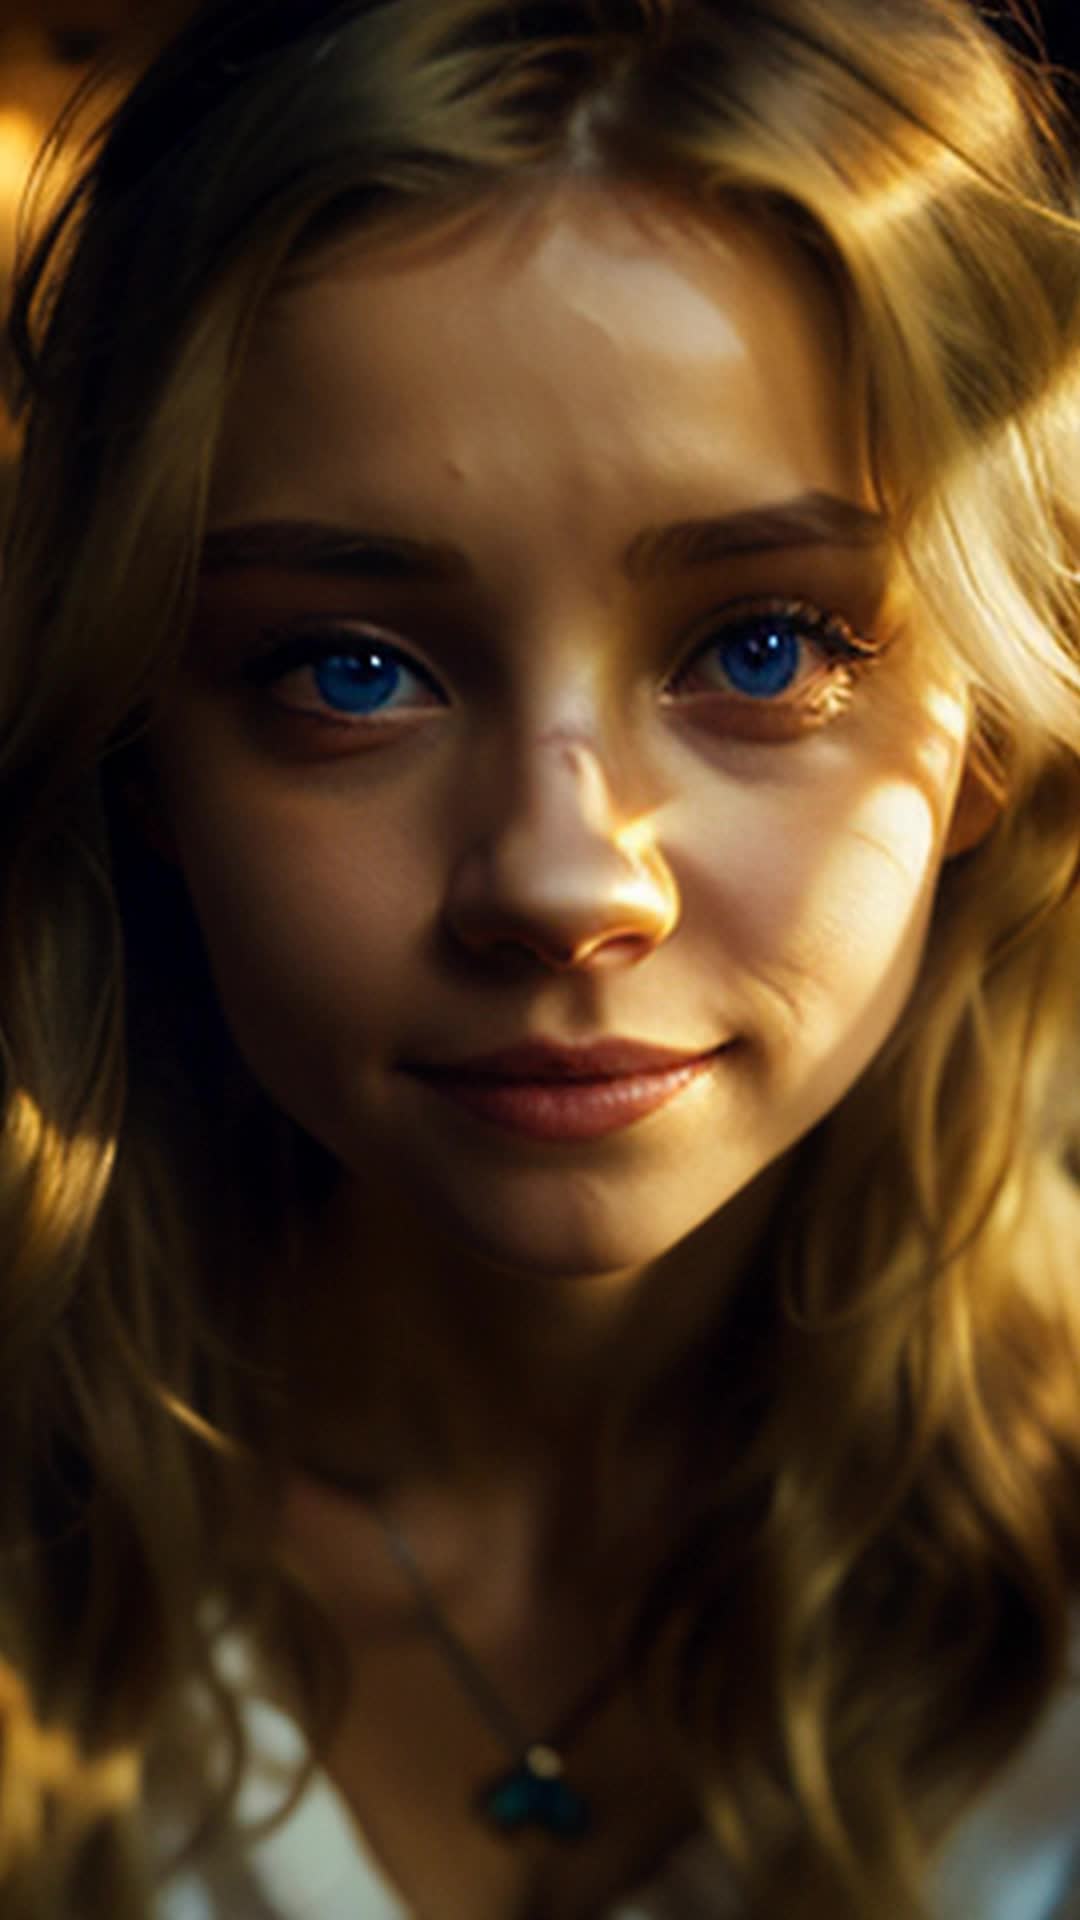 Blonde-haired girl, eyes wide, magical wonder, captivated by story, room illuminated by enthusiasm, soft shadows around, facial expressions focused and enchanted